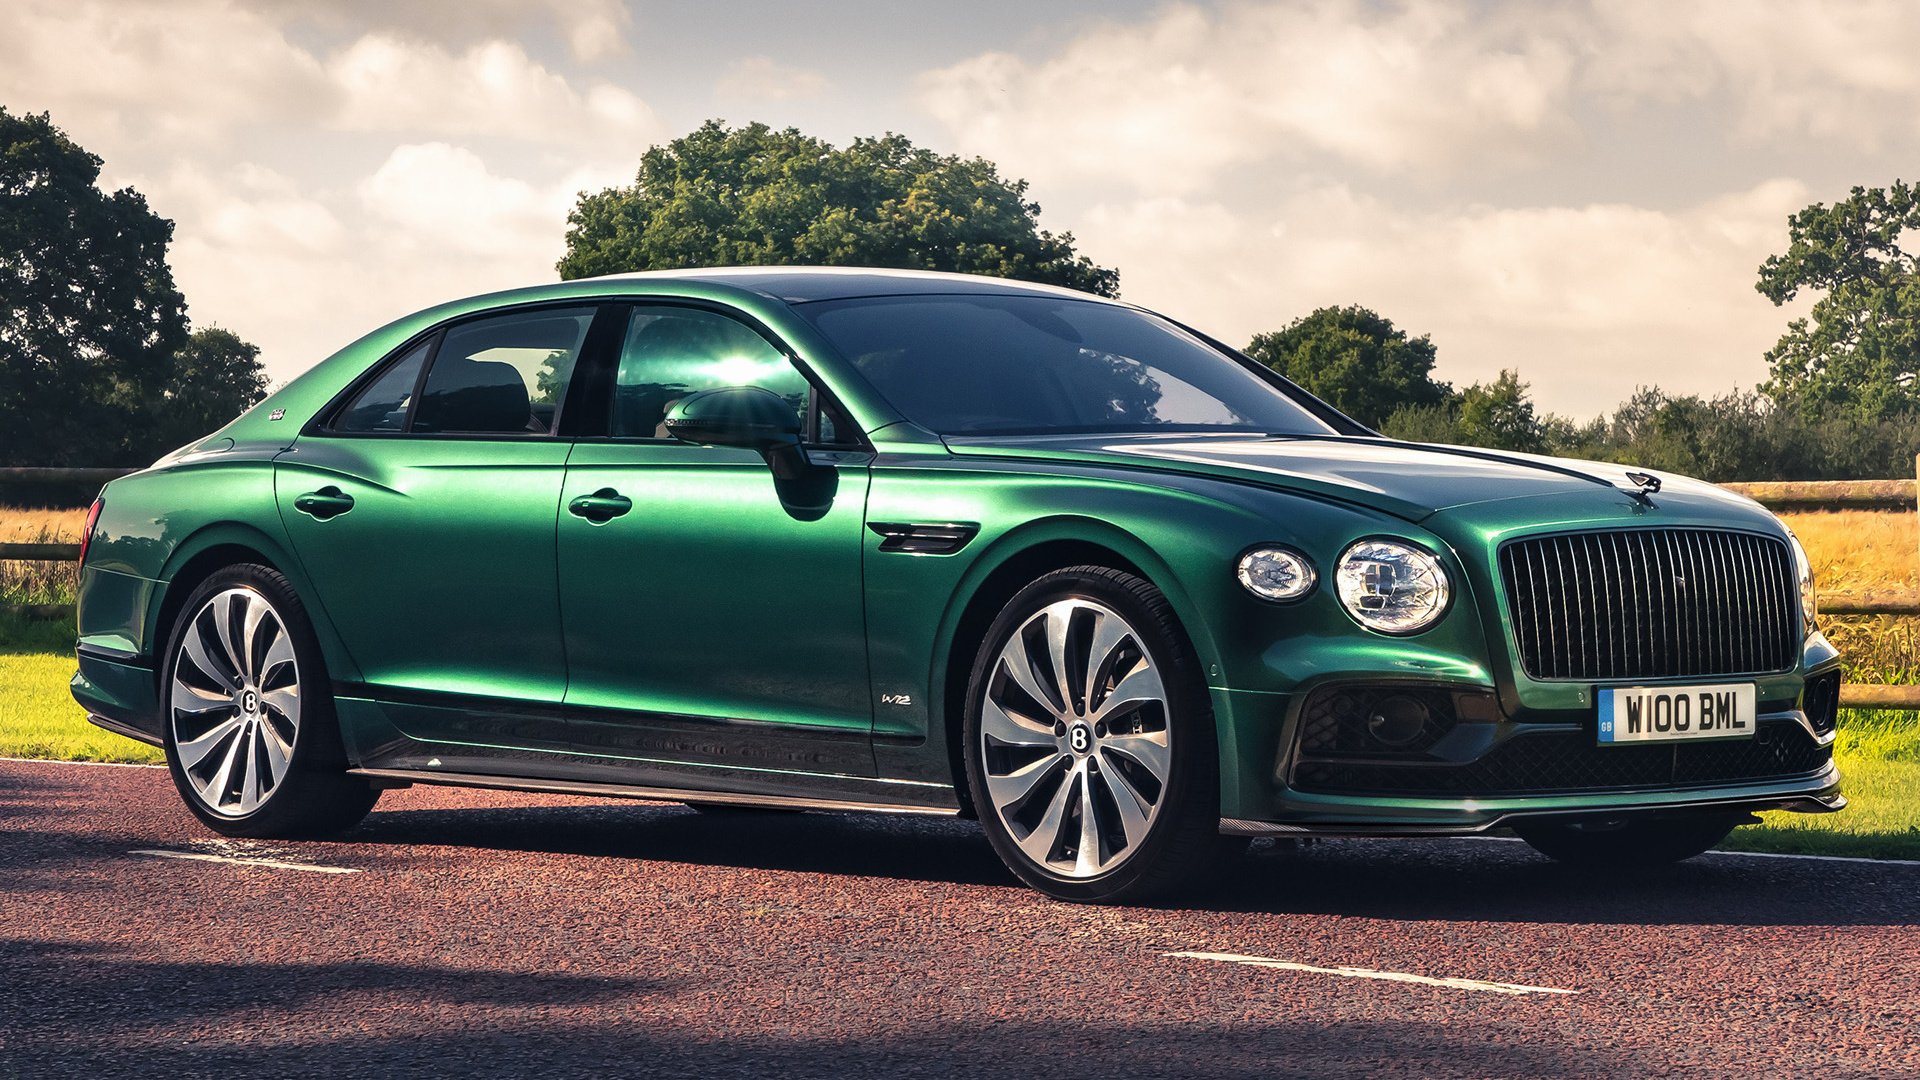 2020 Bentley Flying Spur Styling Specification Hd Wallpaper Background Image 1920x1080